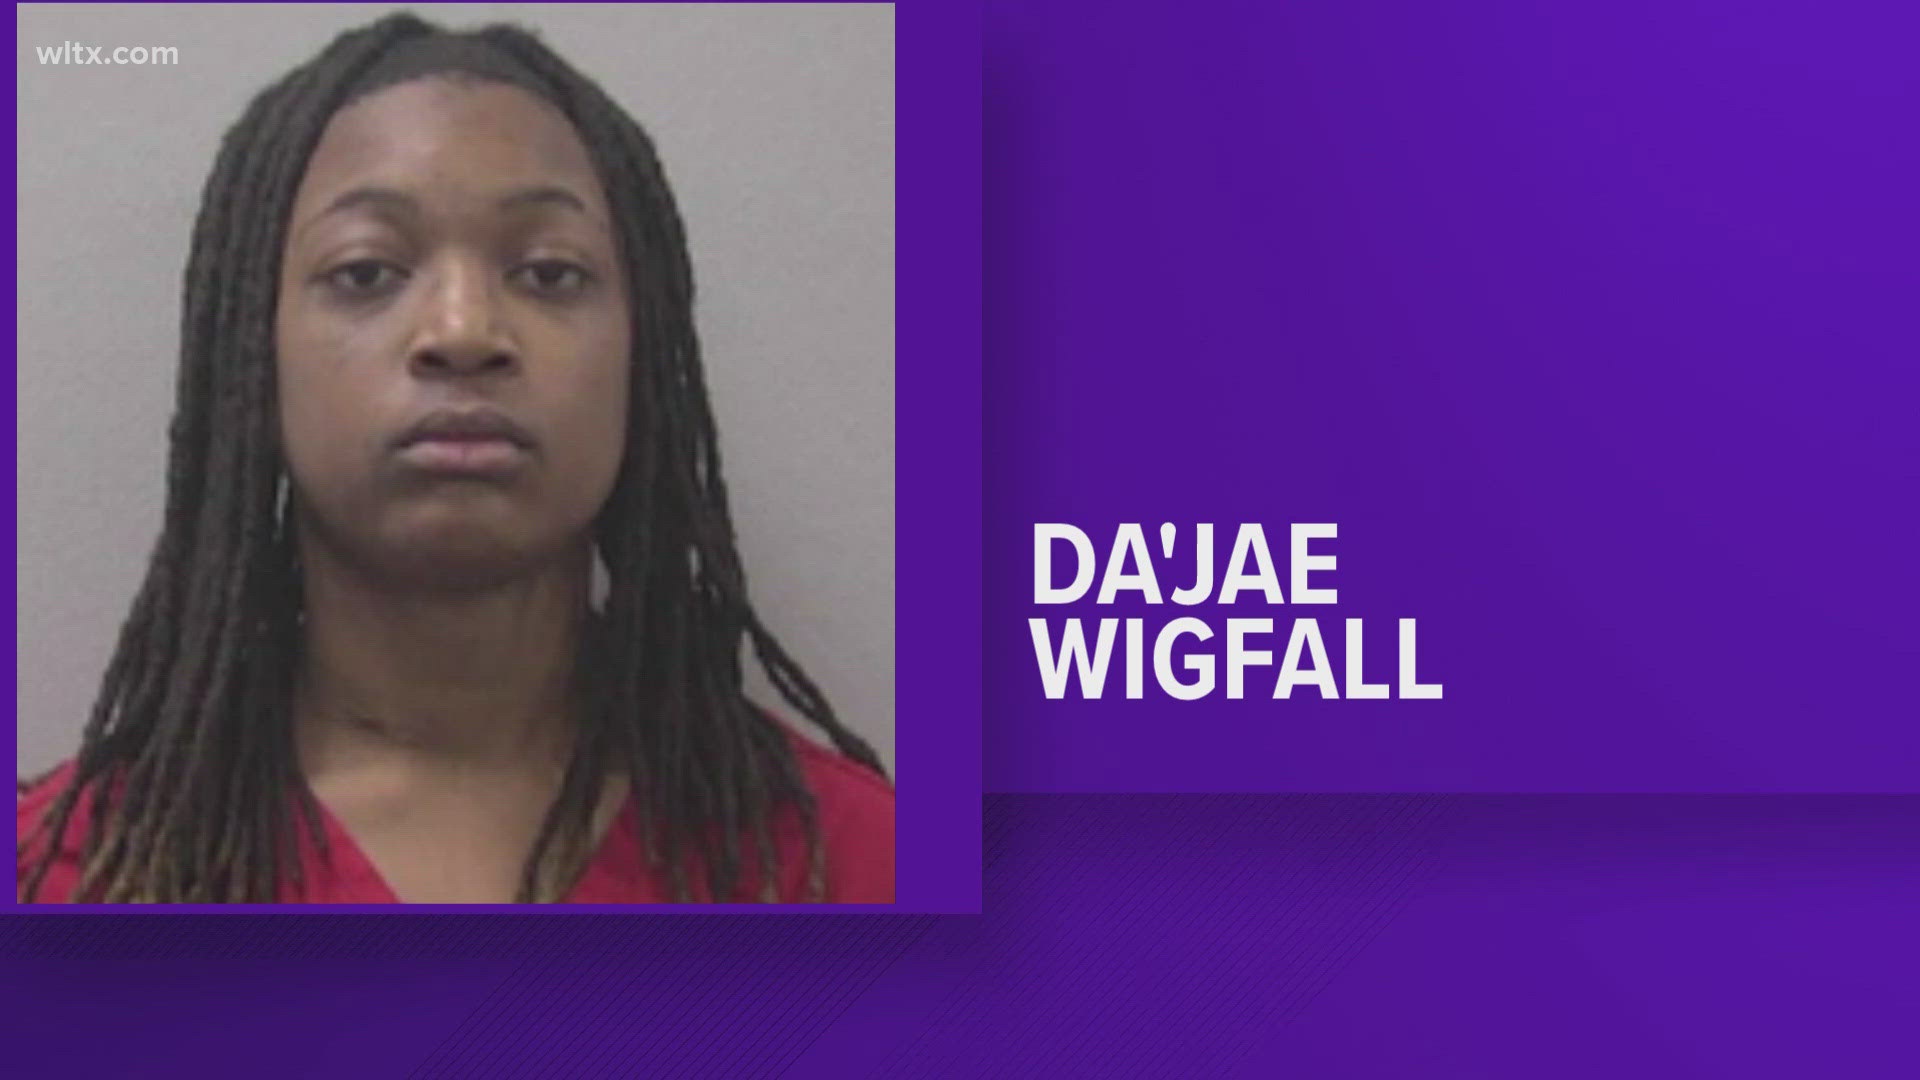 Lexington county needs your help finding Da'Jae Wigfall, 18 who is considered armed and dangerous.